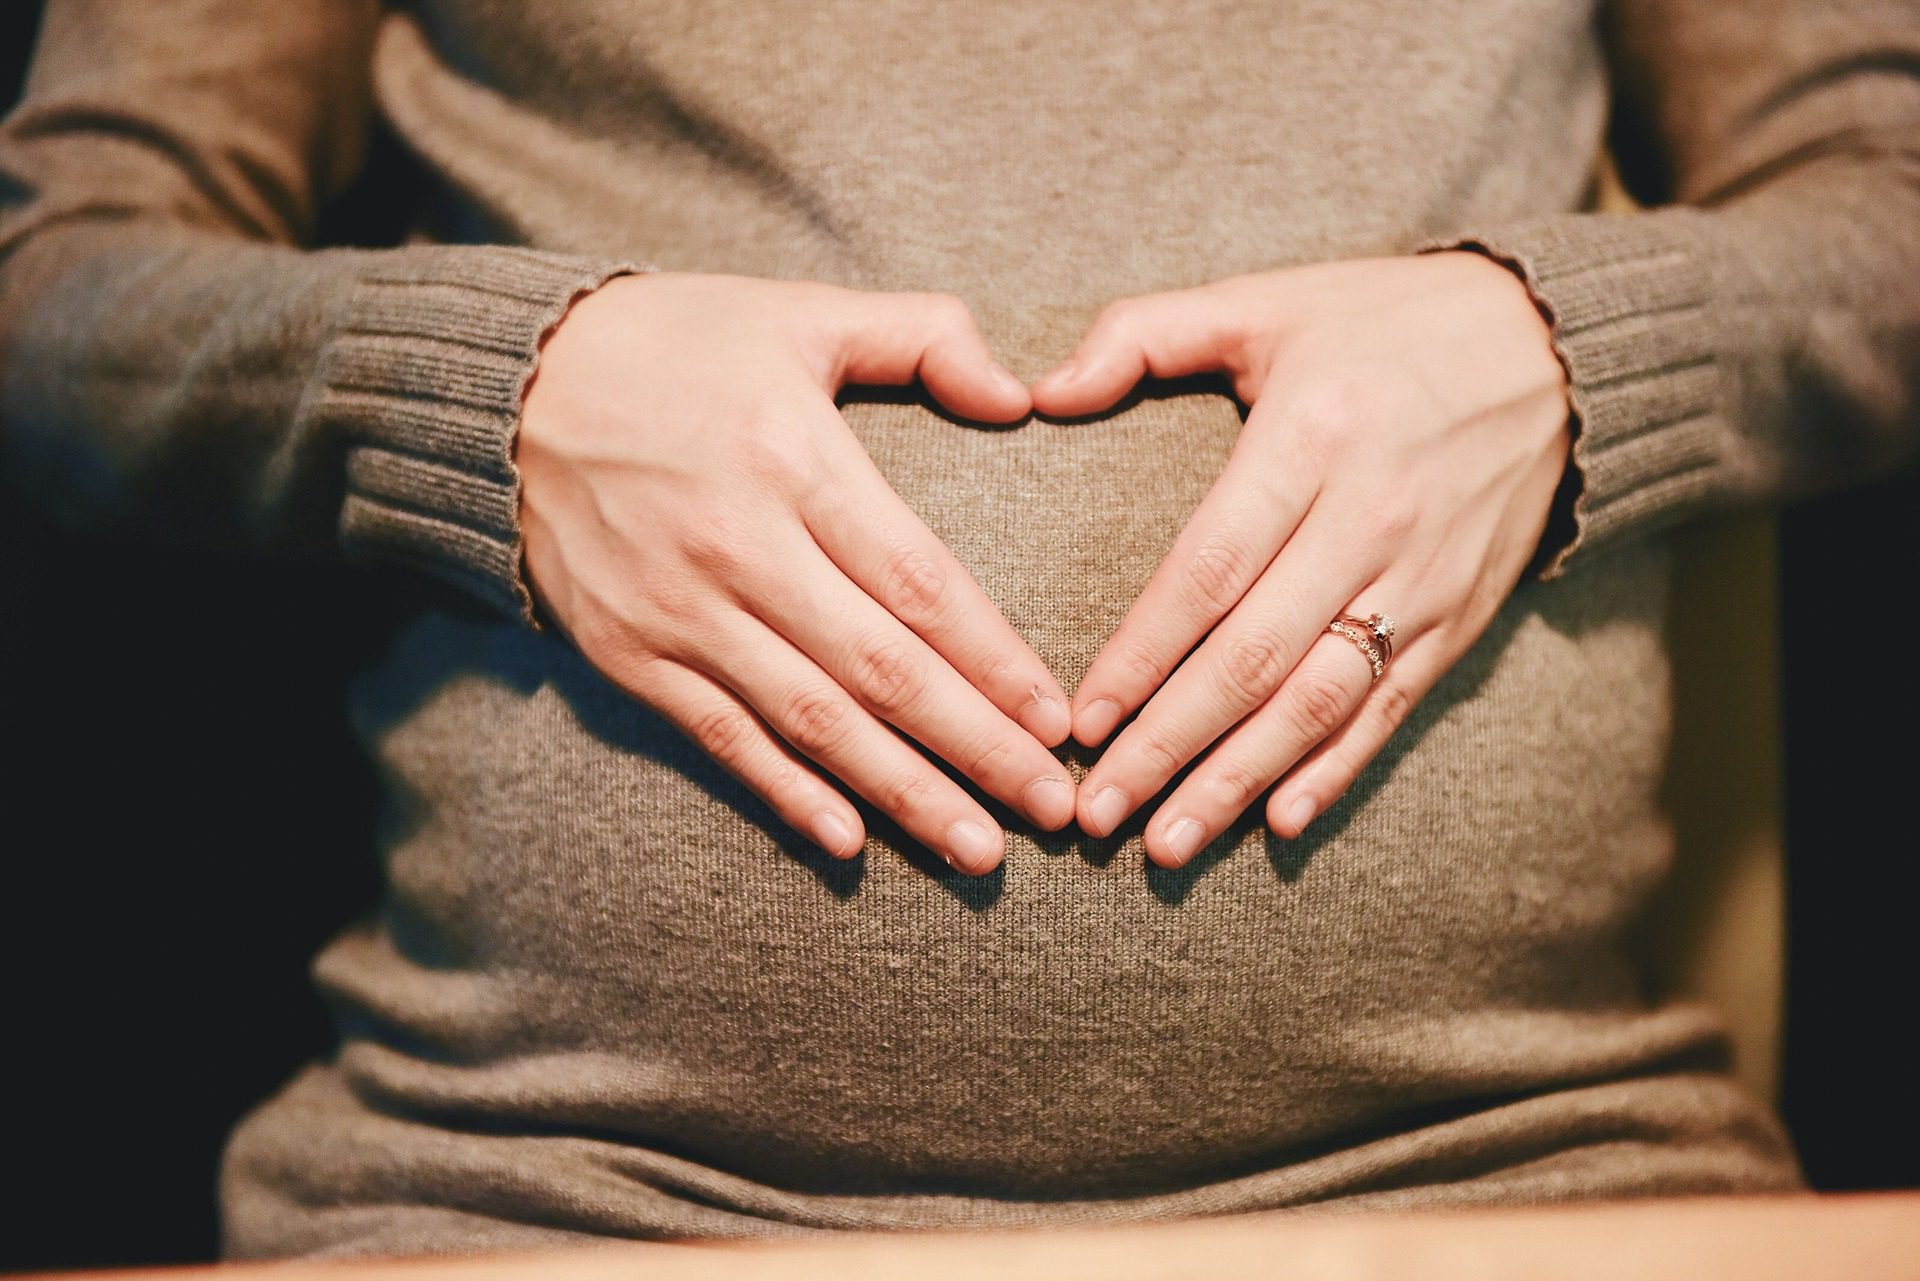 Woman holding her hands in a heart shape over her pregnant belly.